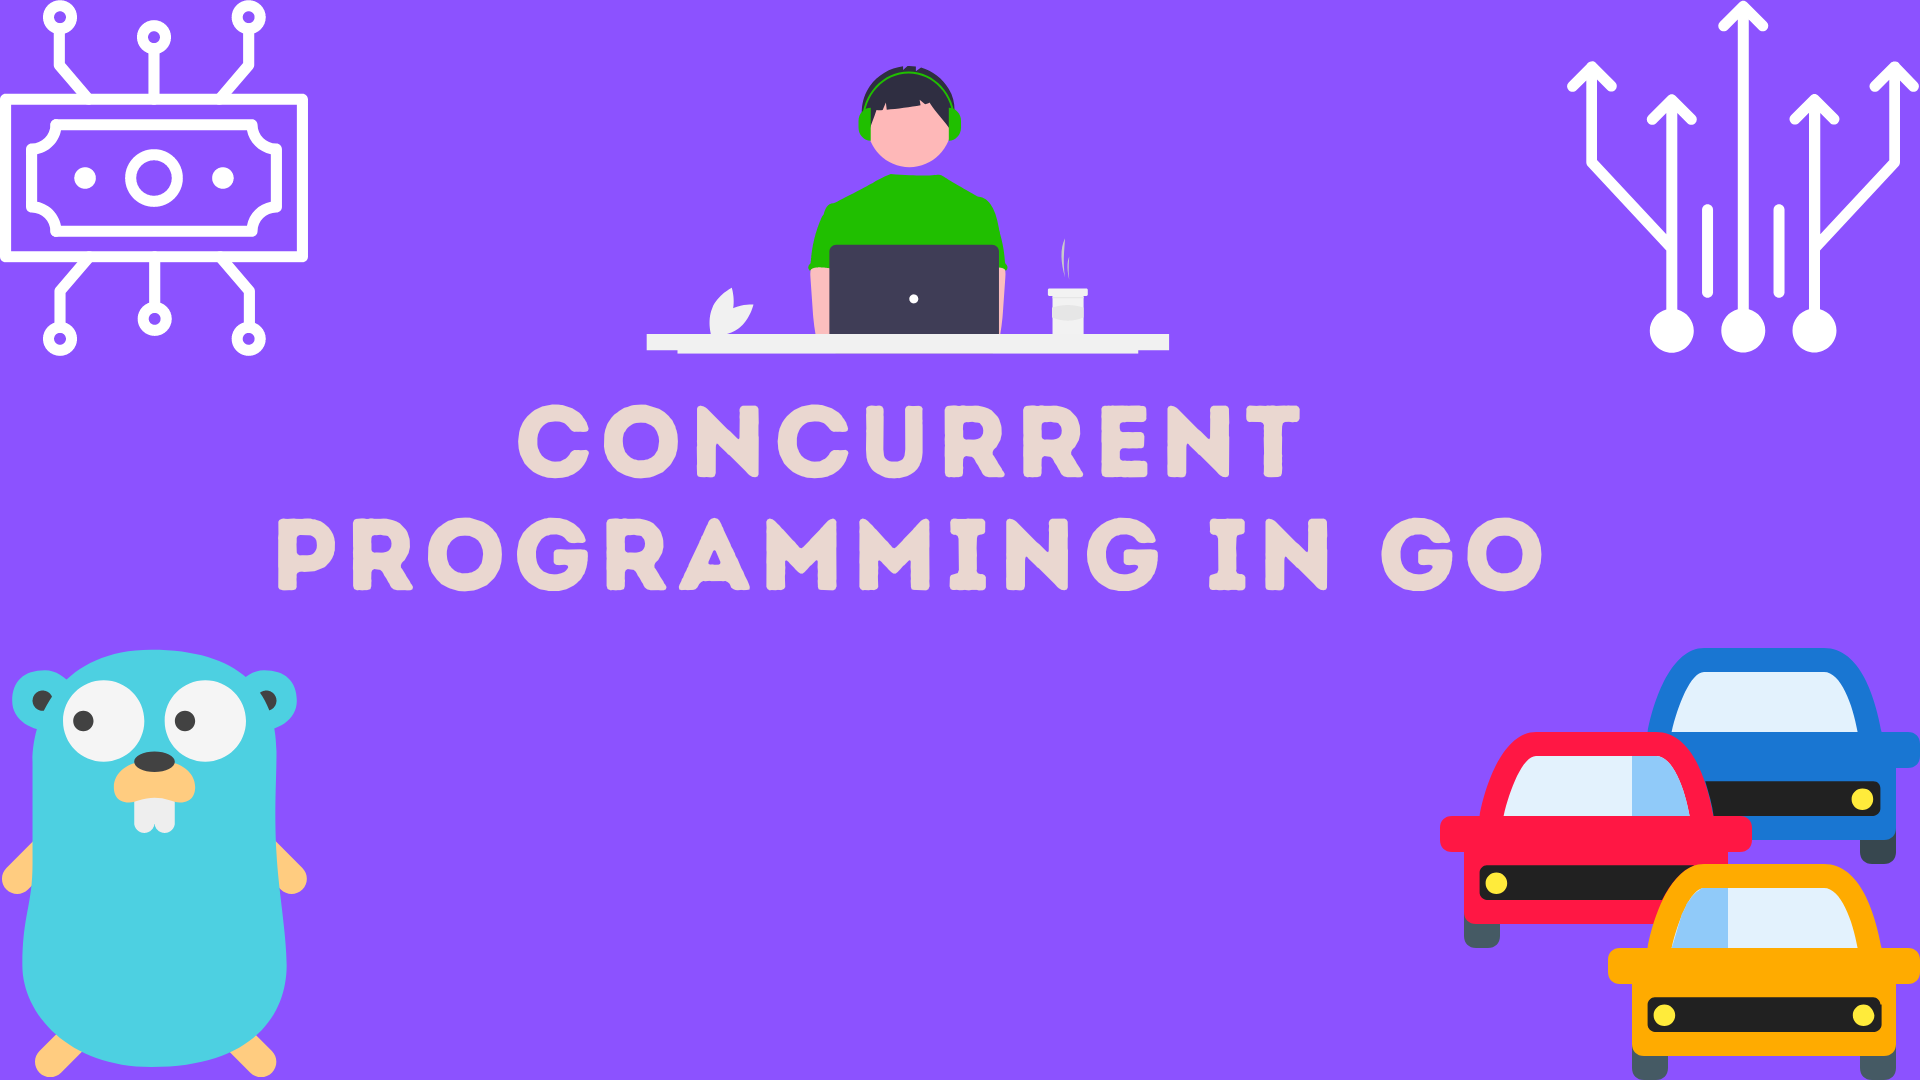 Concurrent Programming in Go – Goroutines, Channels, and More Explained with Examples